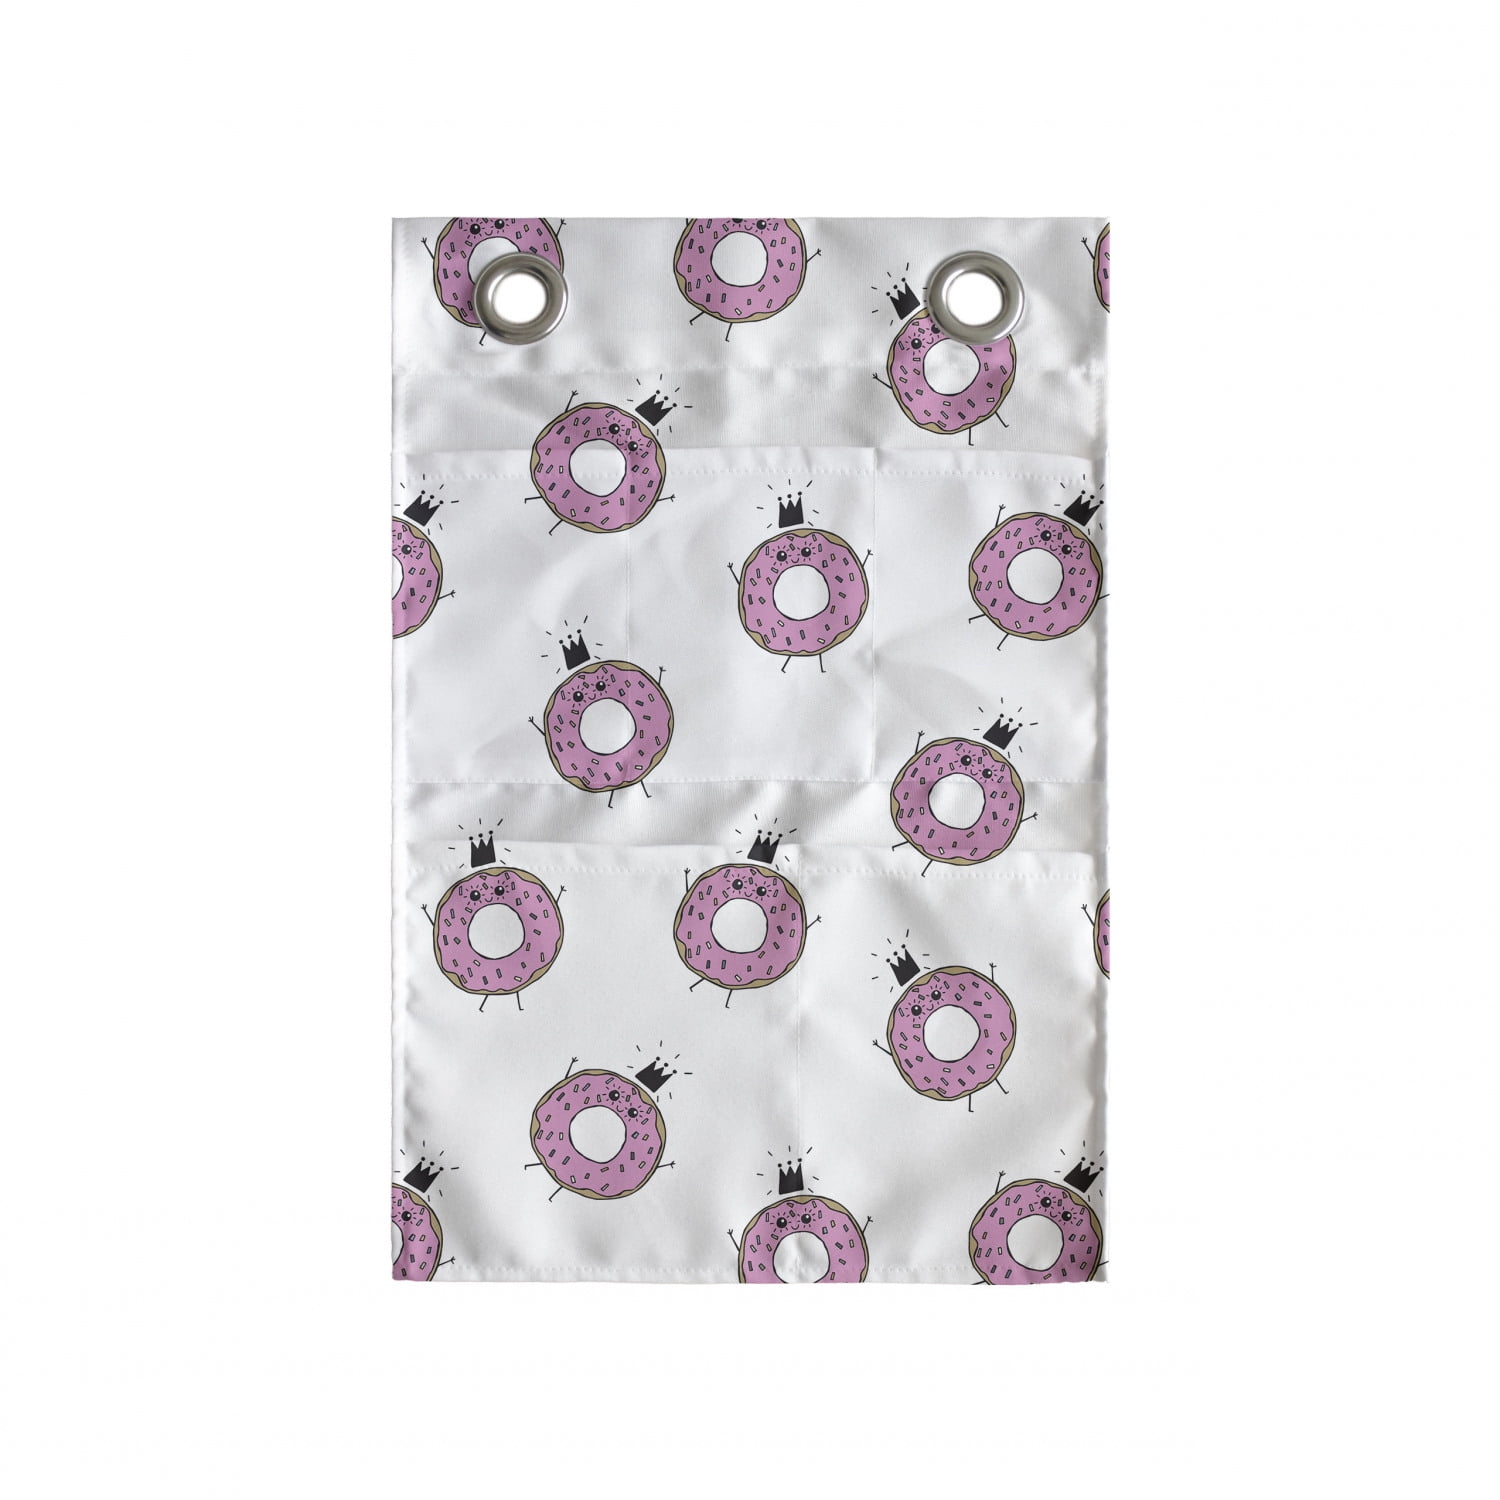 Donuts Storage Toy Bag Chair, Yummy Smiling Doughnuts with Crowns, Stuffed  Animal Organizer Washable Bag, Large Size, White Pale Pink, by Ambesonne 